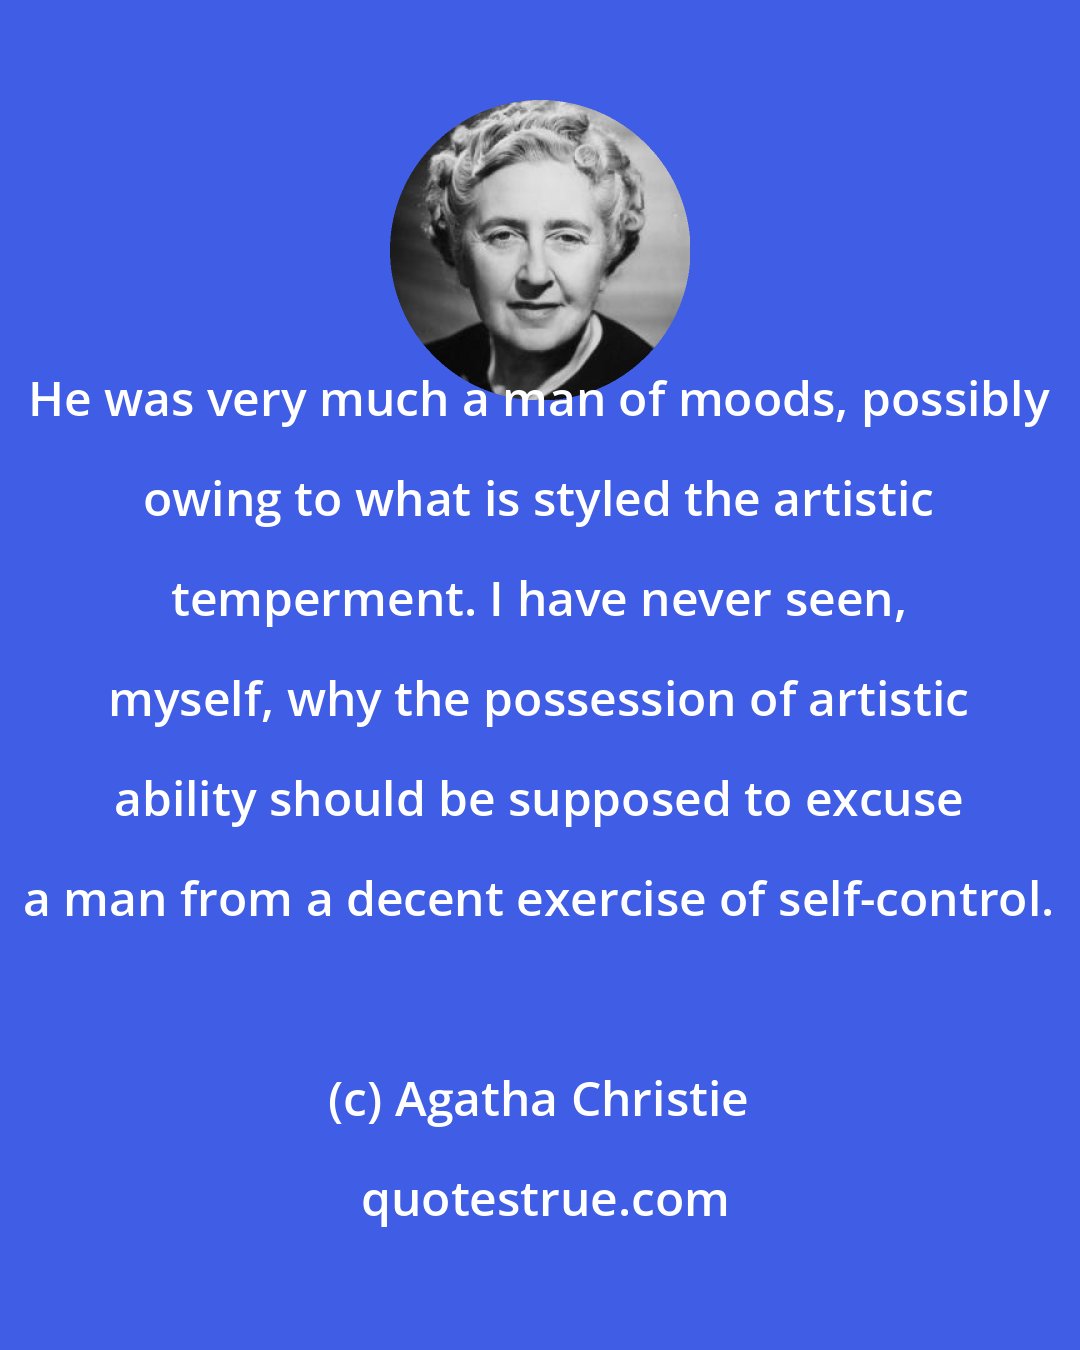 Agatha Christie: He was very much a man of moods, possibly owing to what is styled the artistic temperment. I have never seen, myself, why the possession of artistic ability should be supposed to excuse a man from a decent exercise of self-control.